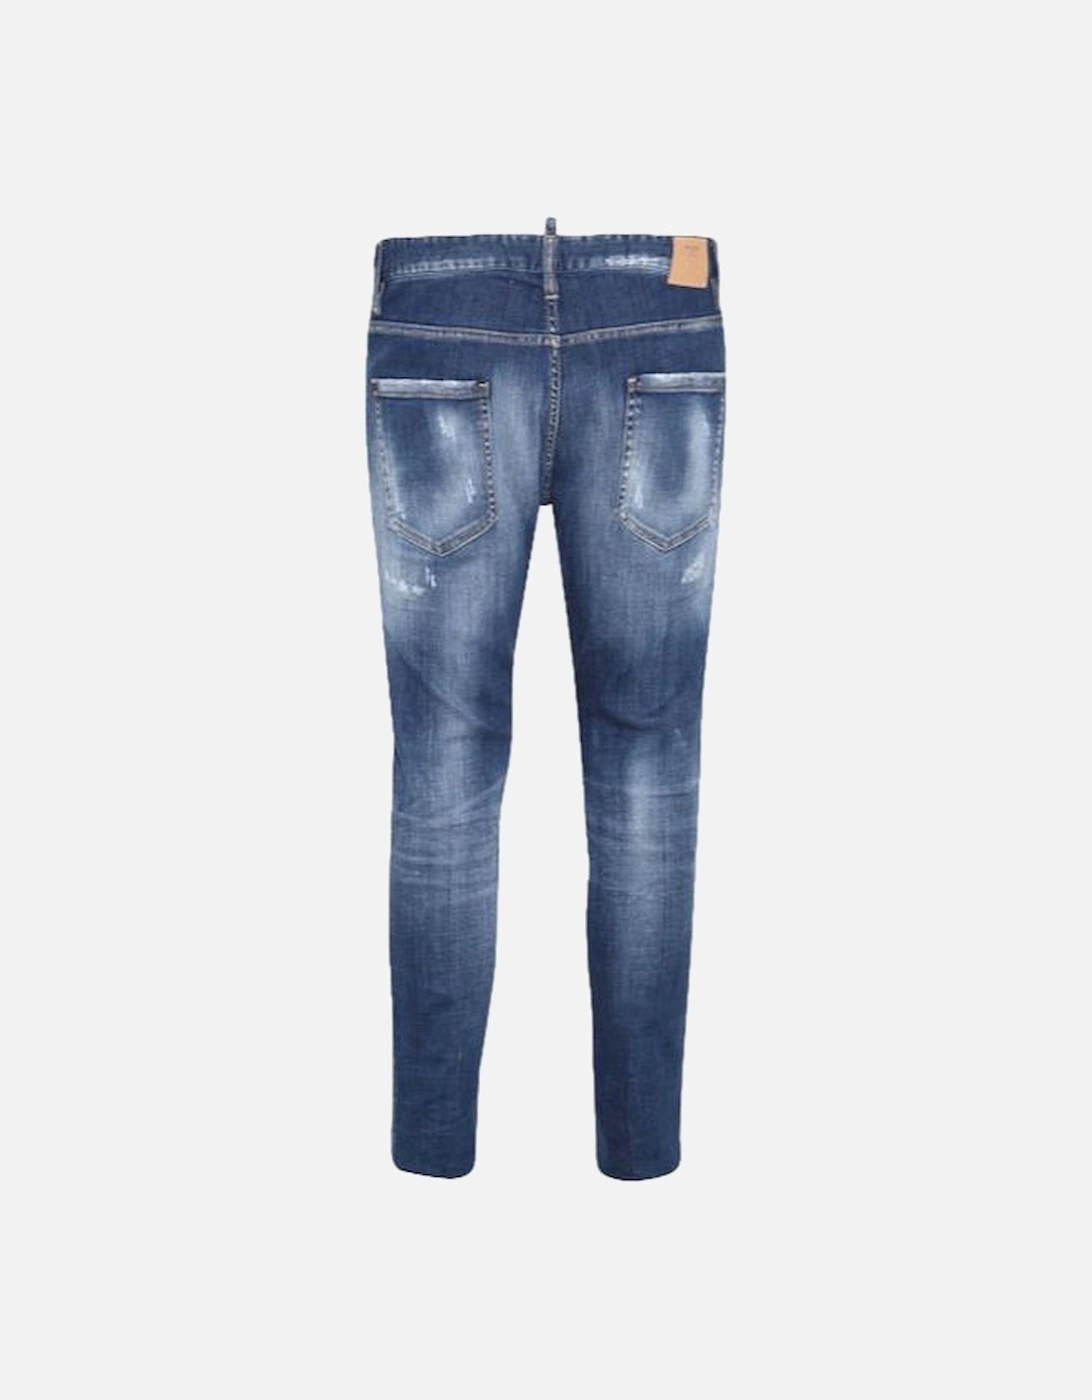 Skater Distressed Faded Ripped Jeans in Blue